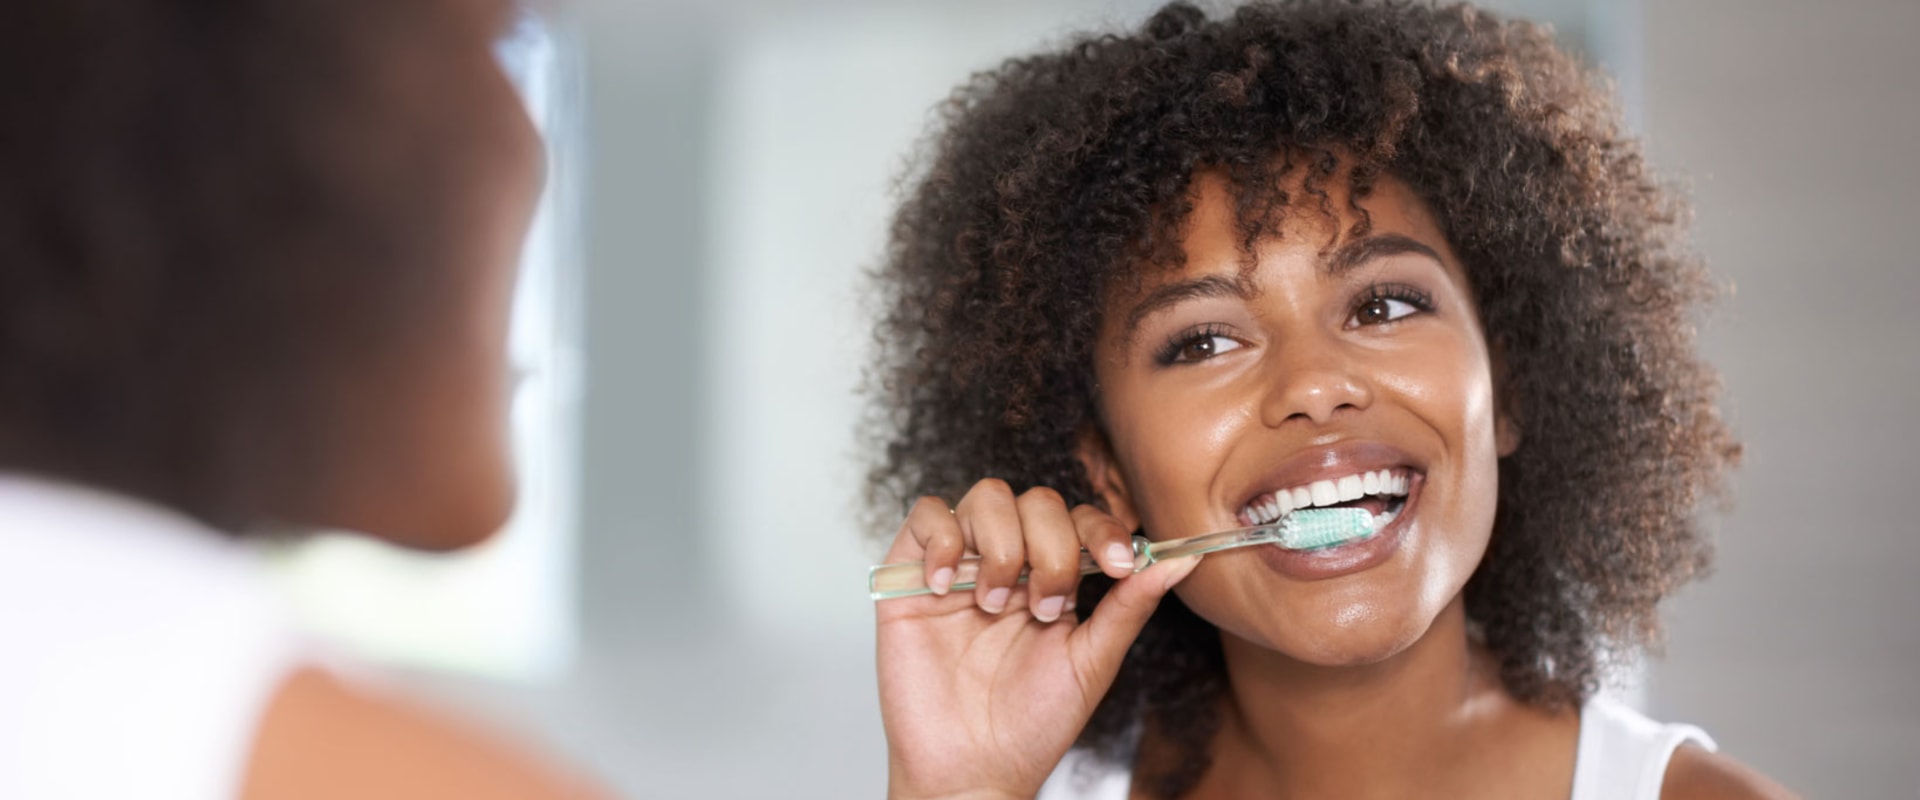 Ways to Improve Your Oral Health for a Beautiful Smile